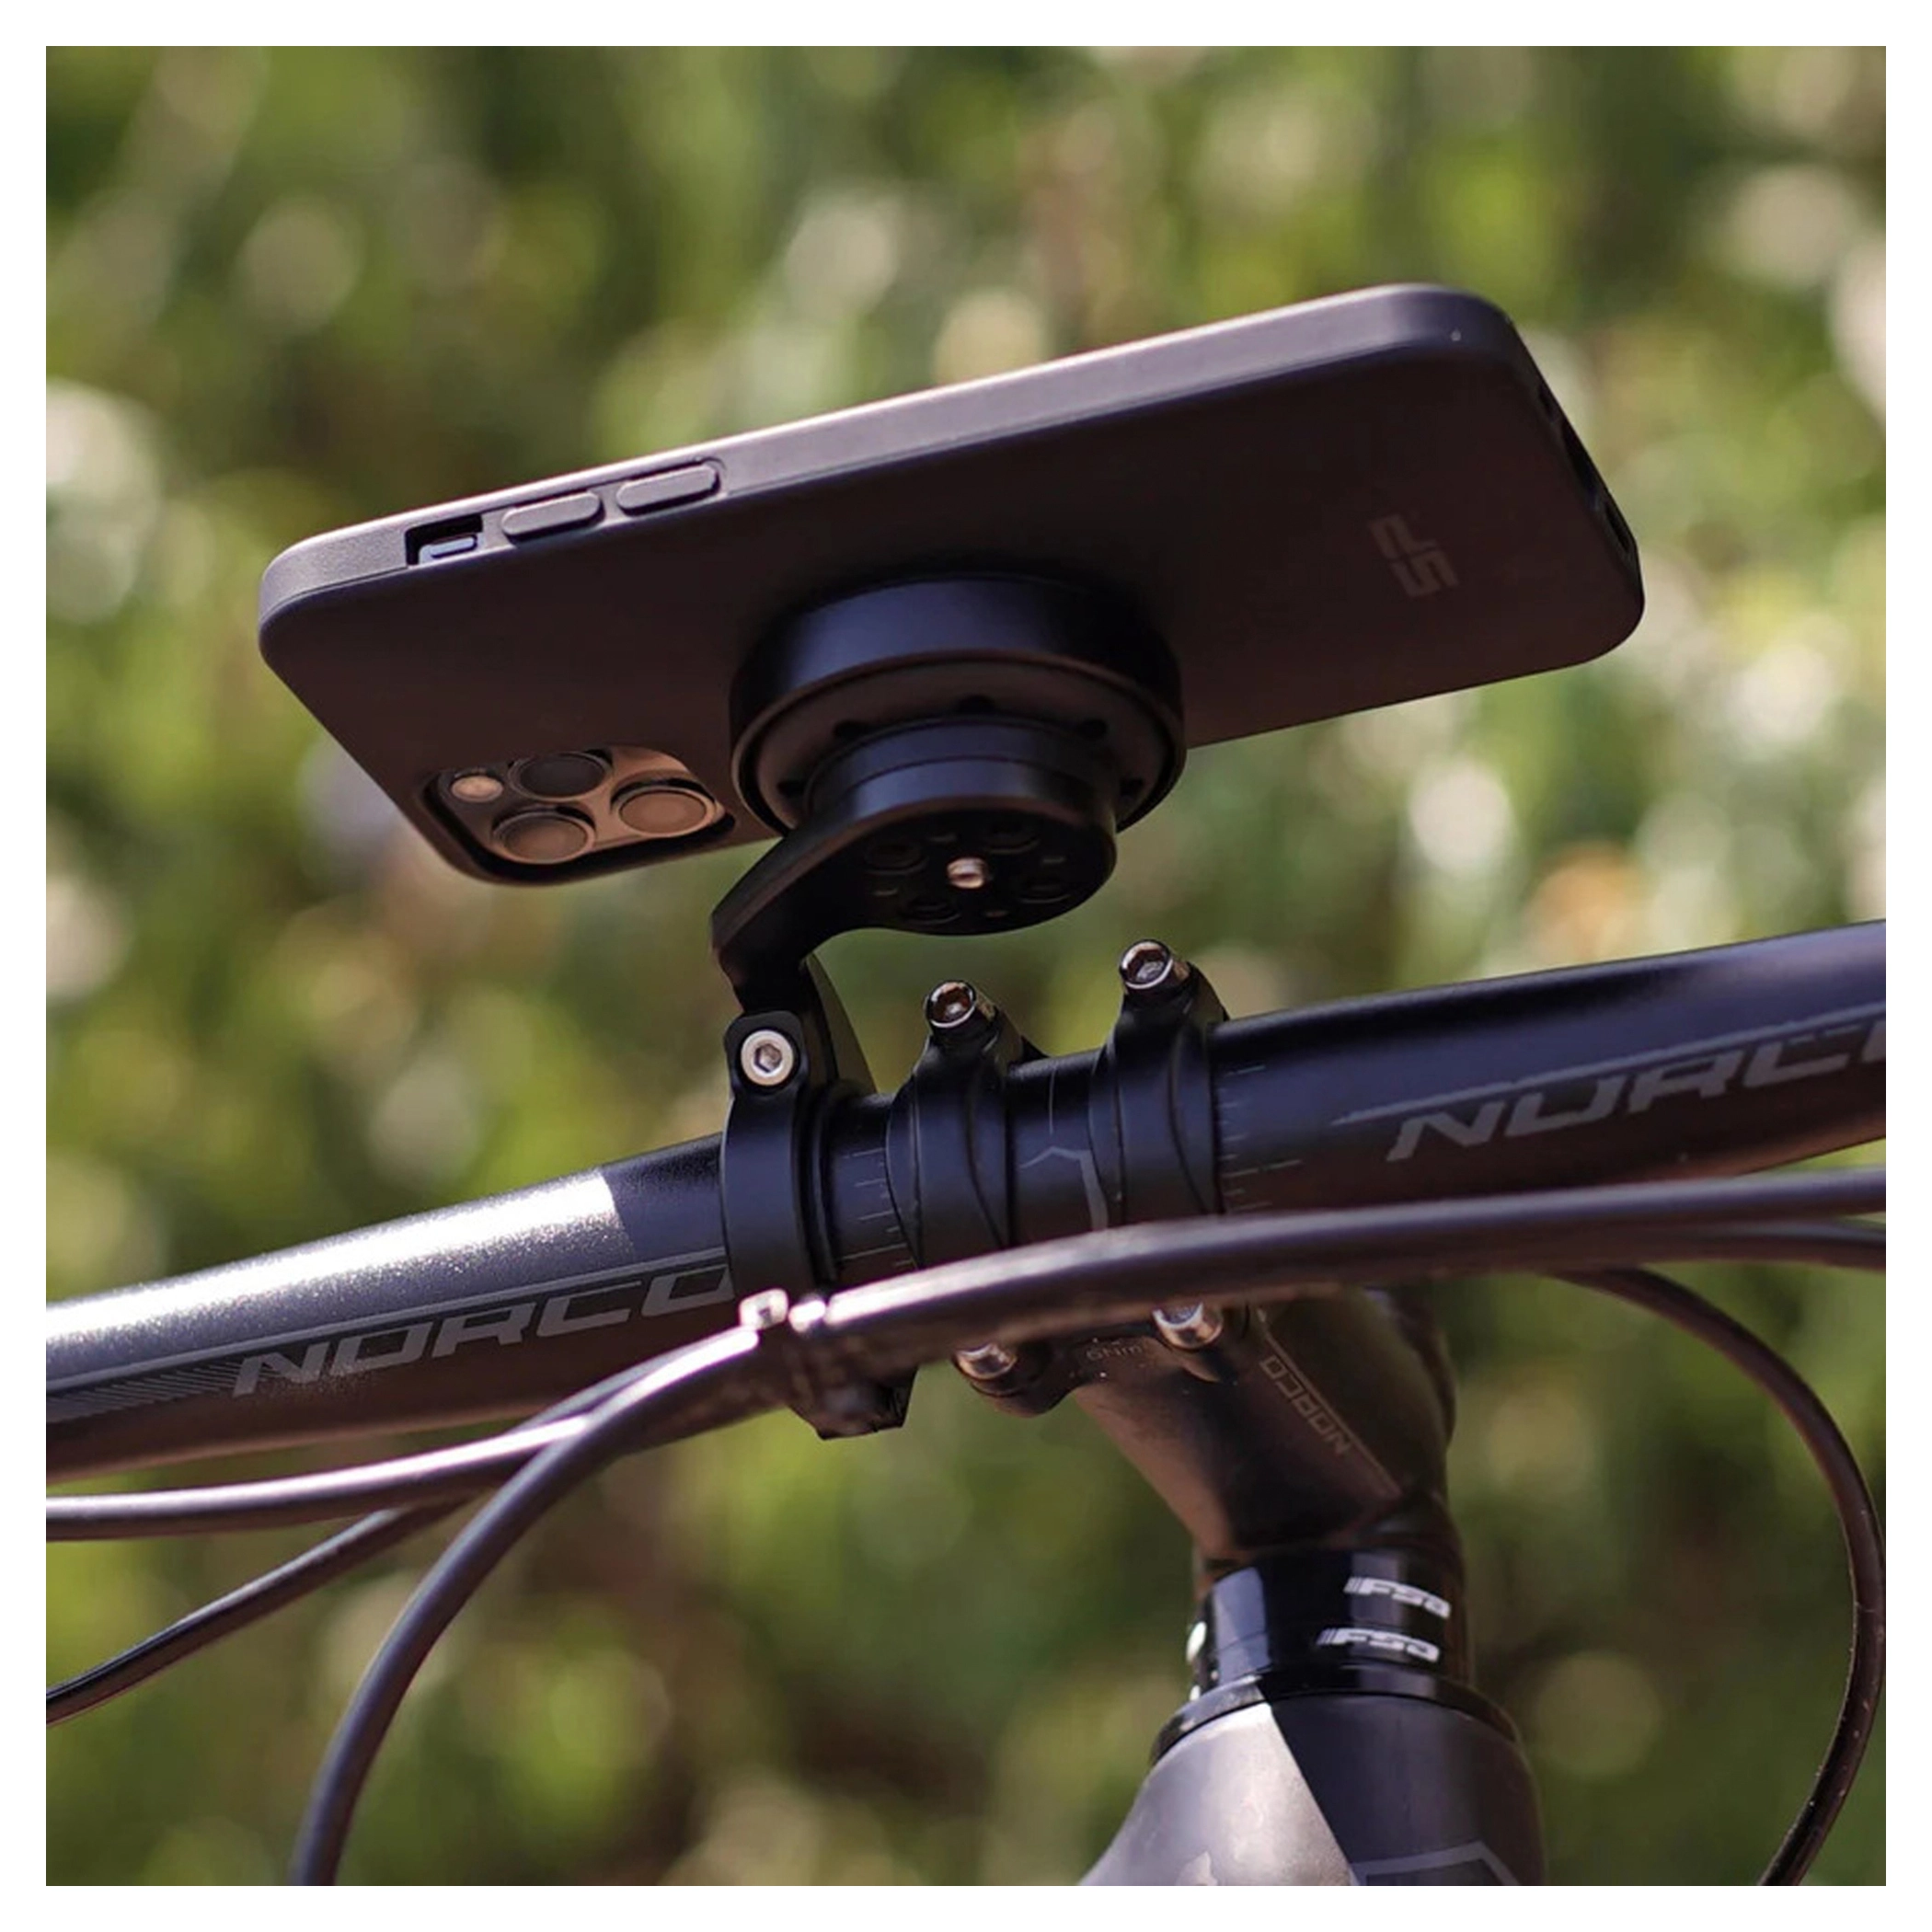 SP Connect Mounts – Product Review - Bike Rider Magazine